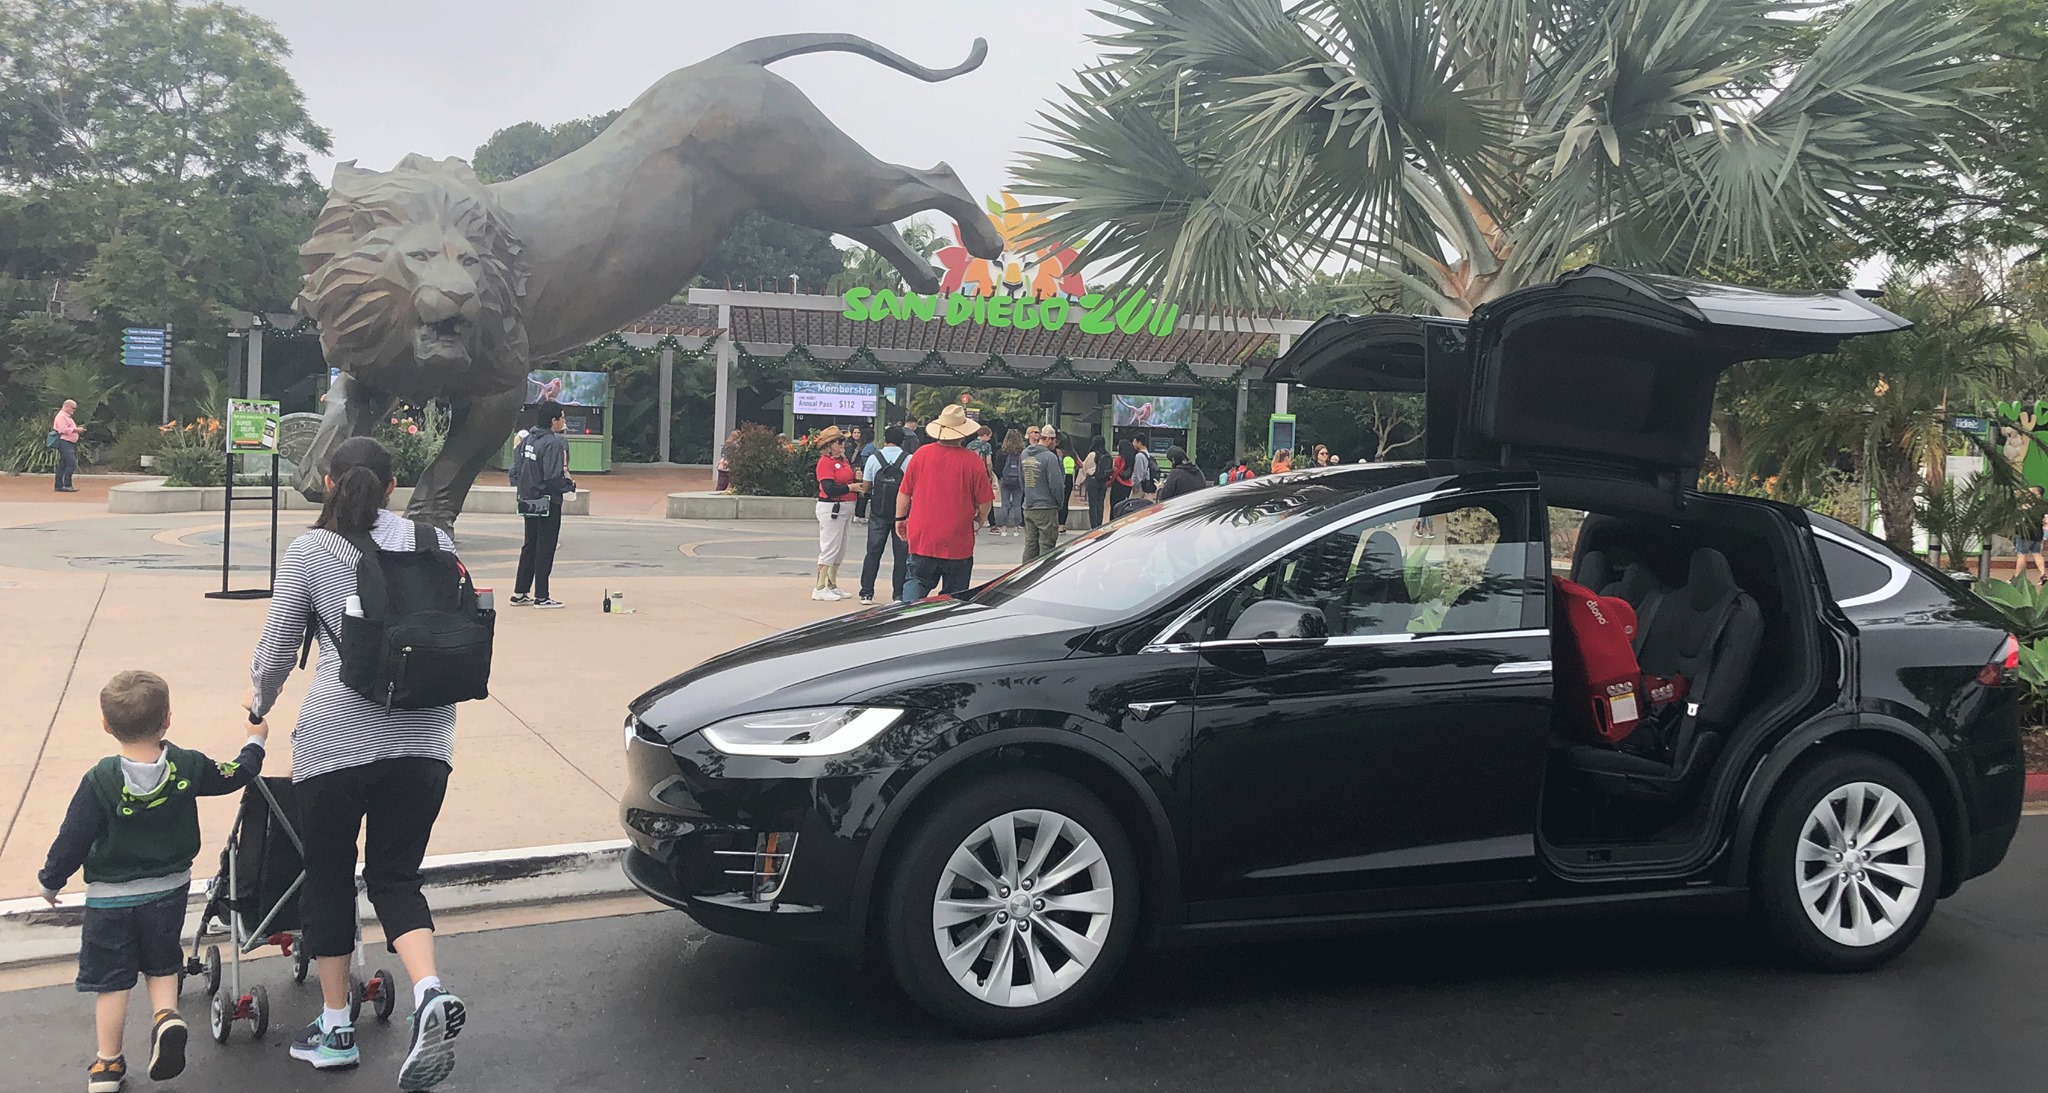 transportation service near me, image of tesla x picking up customers that need a ride.